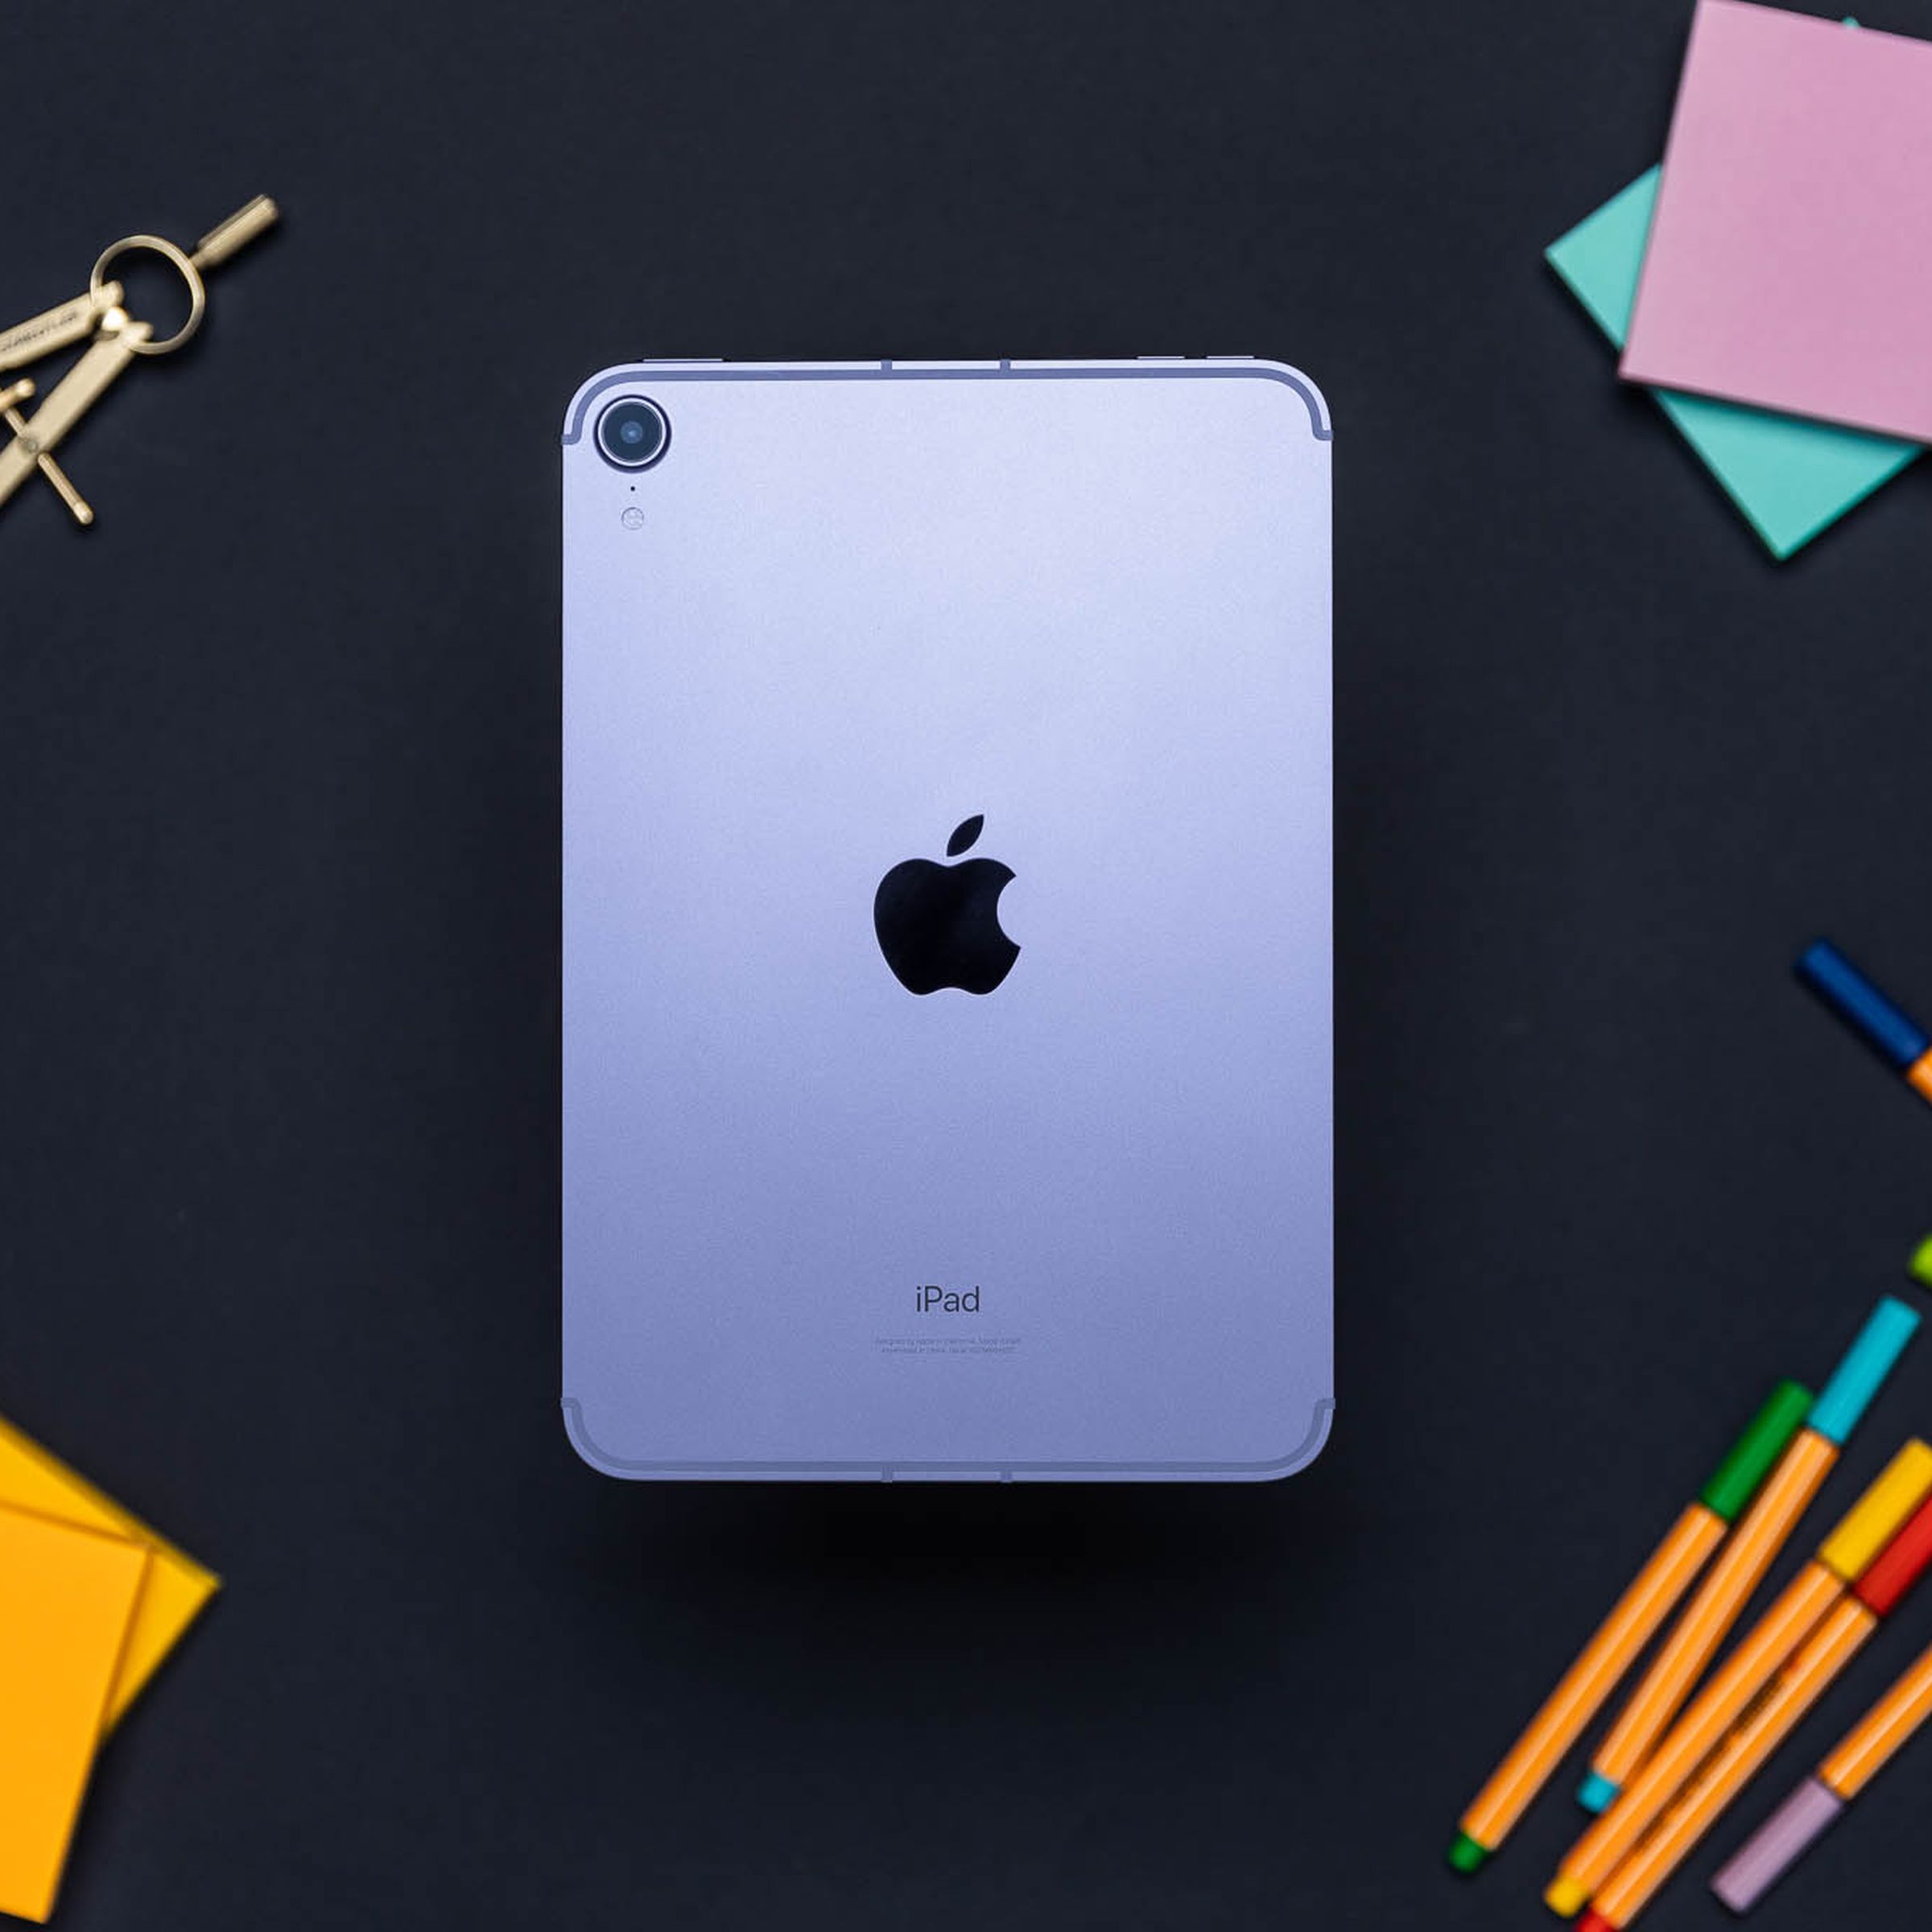 The latest iPad Mini is $100 off for Cyber Monday at a few retailers.